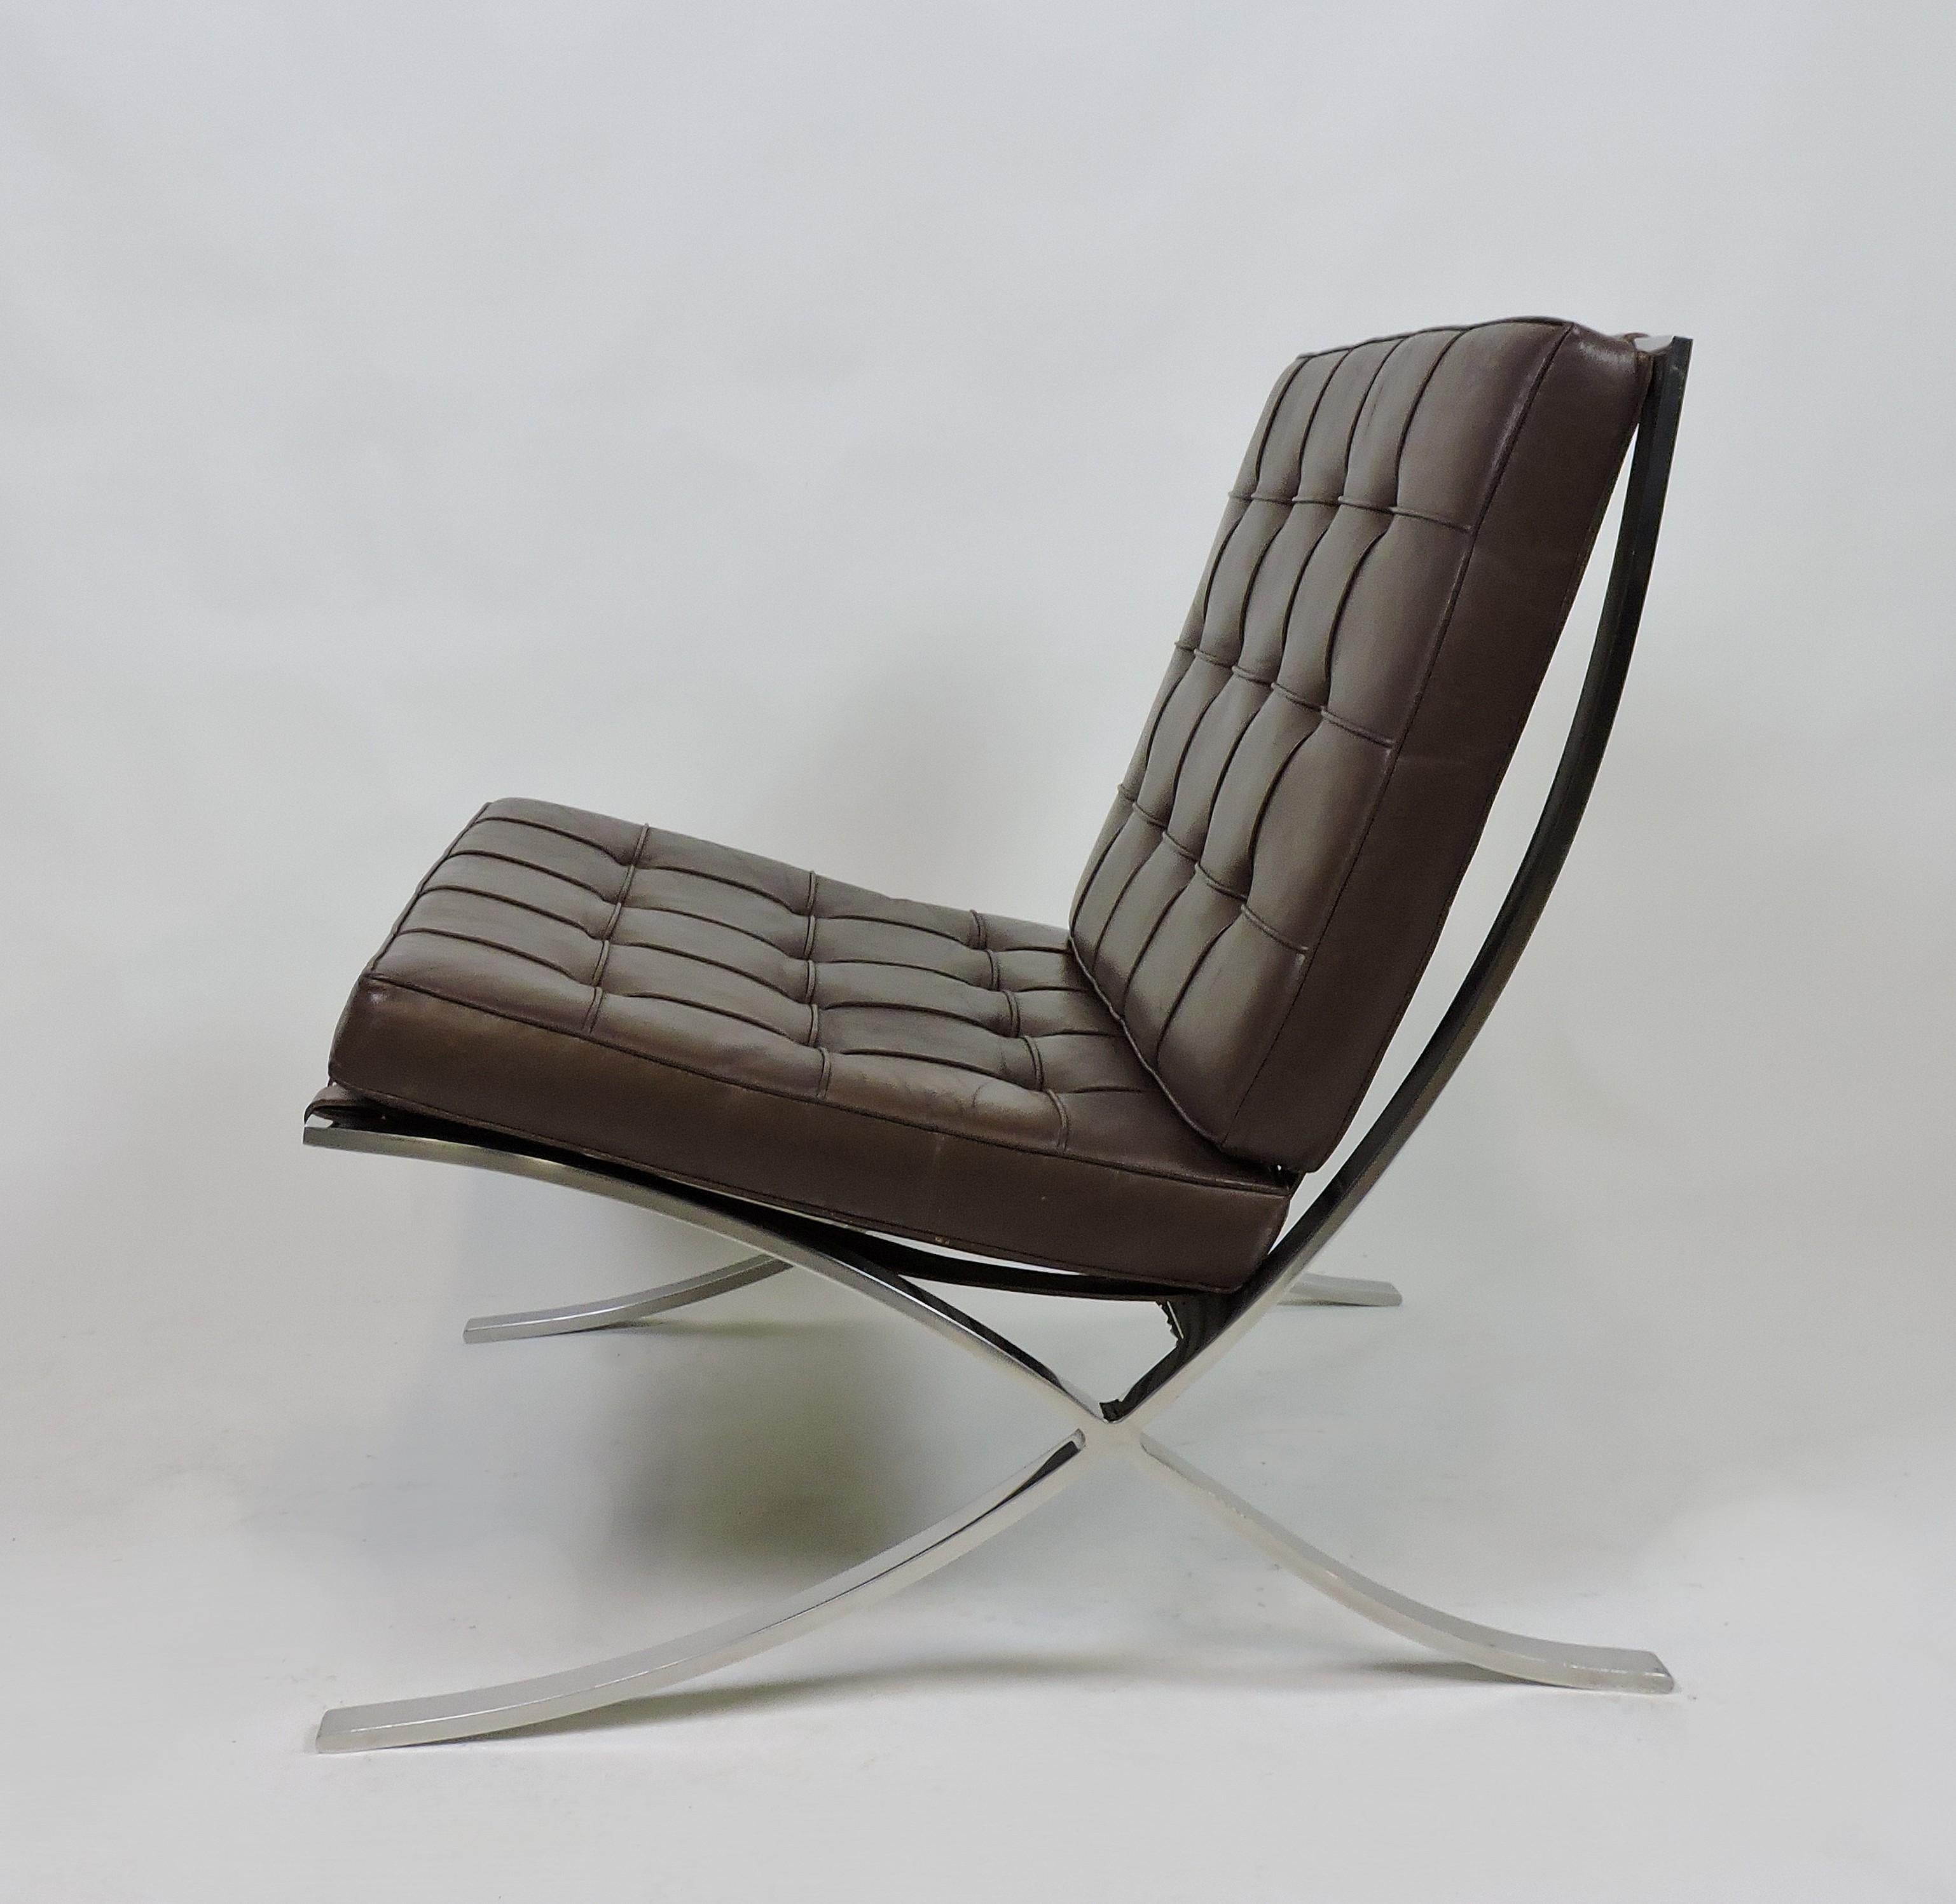 Polished 1960s Mies van der Rohe Knoll Bacelona Stainless Steel and Leather Chair 